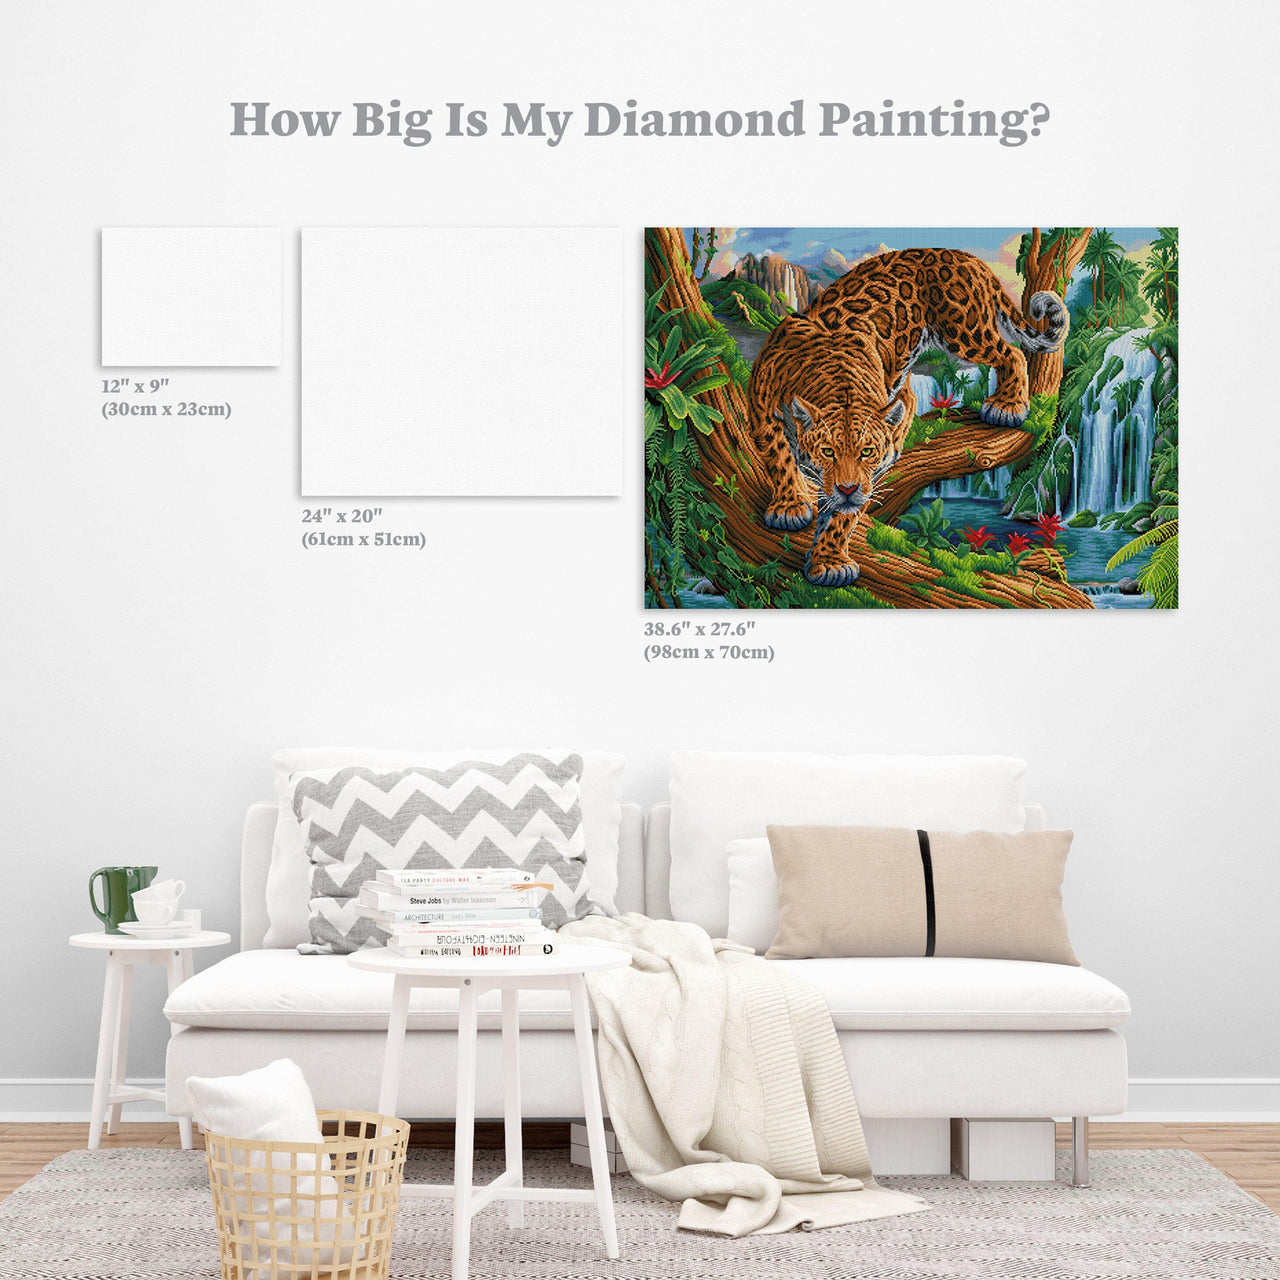 Diamond Painting Prowling Leopard 38.6" x 27.6″ (98cm x 70cm) / Square with 49 Colors including 3 ABs / 107,476